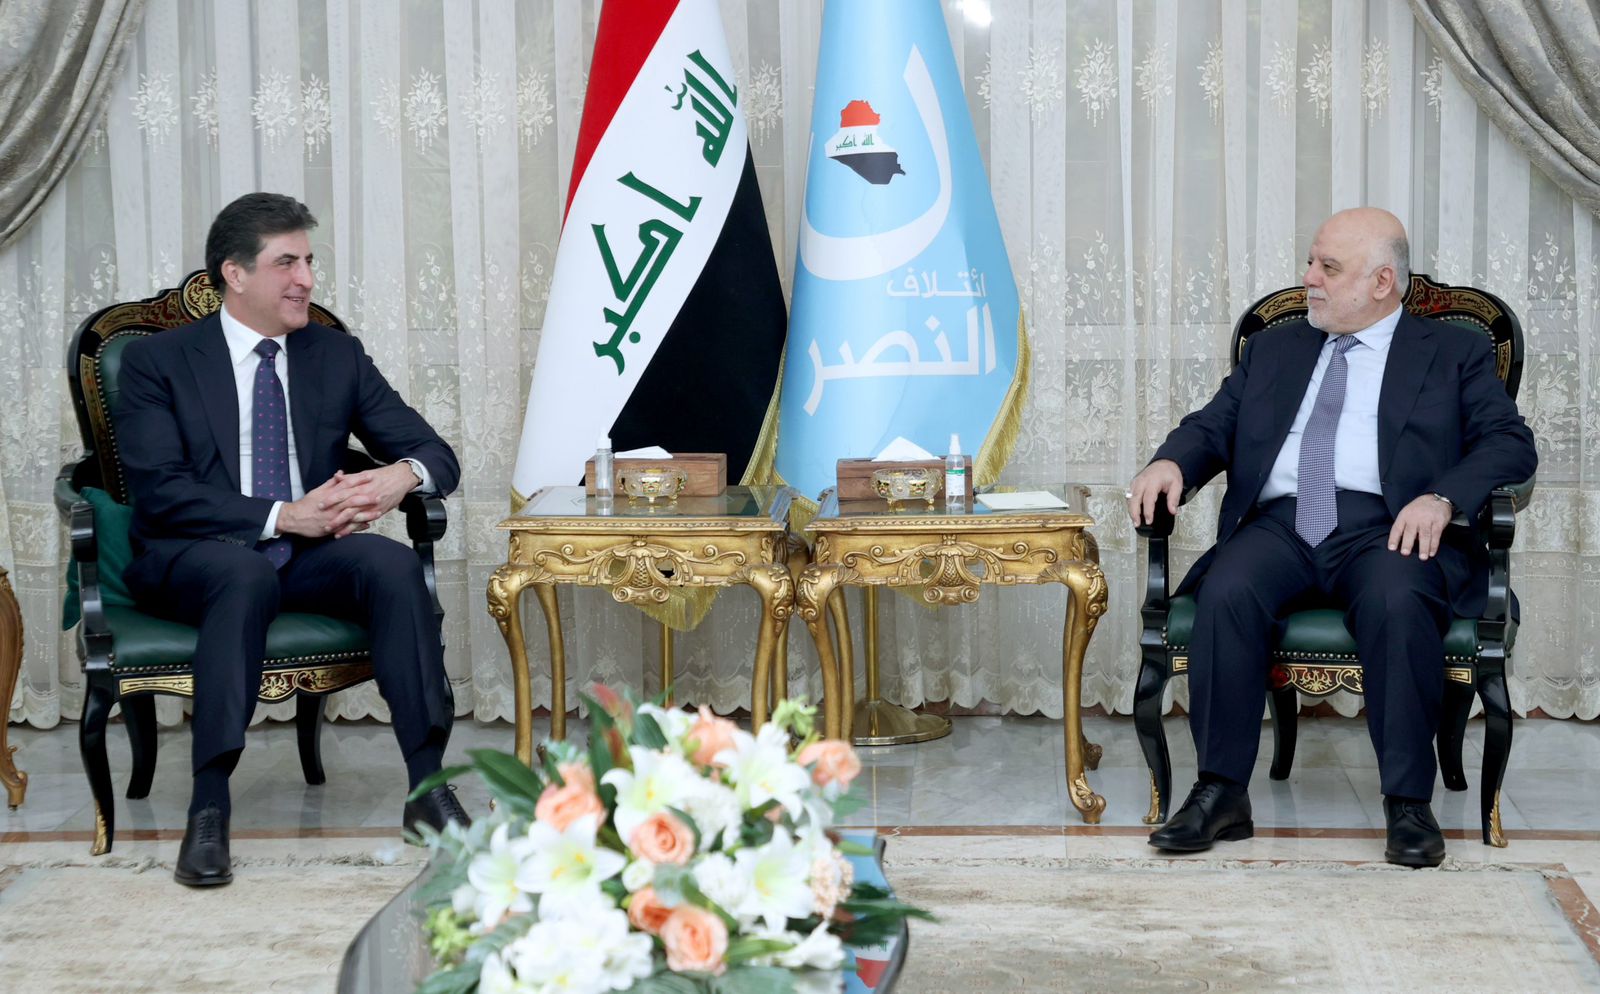 President Barzani and former PM al-Abadi discuss joint action to cope with crises in Iraq